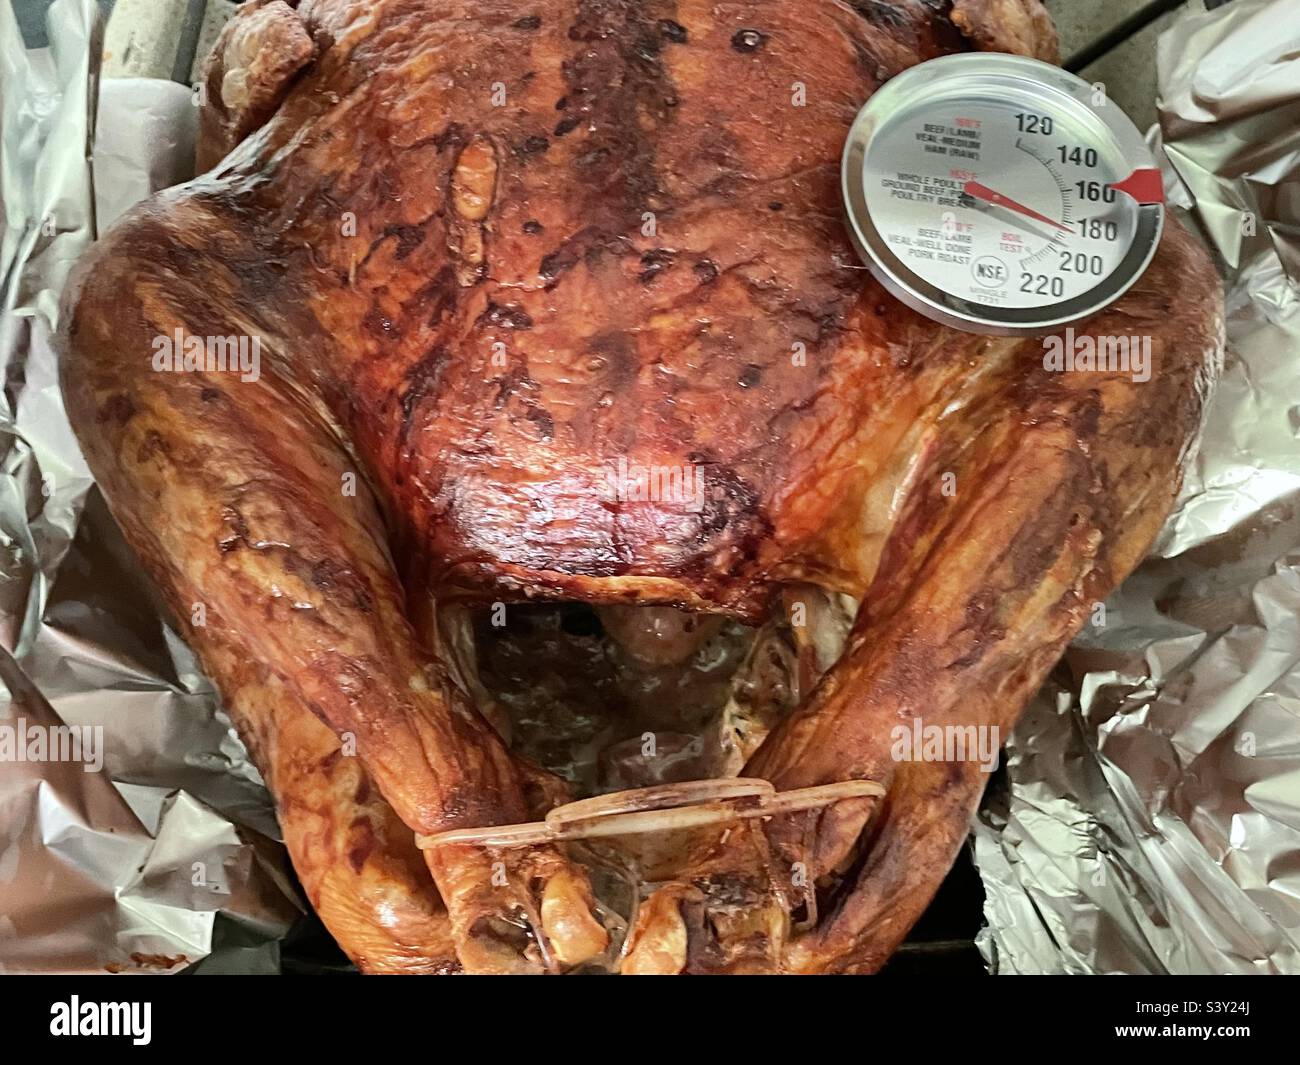 https://c8.alamy.com/comp/S3Y24J/thanksgiving-turkey-taken-from-the-oven-to-check-the-meat-thermometer-reading-which-is-sitting-at-about-190-degrees-getting-close-to-being-deliciously-done-and-ready-to-eat-S3Y24J.jpg